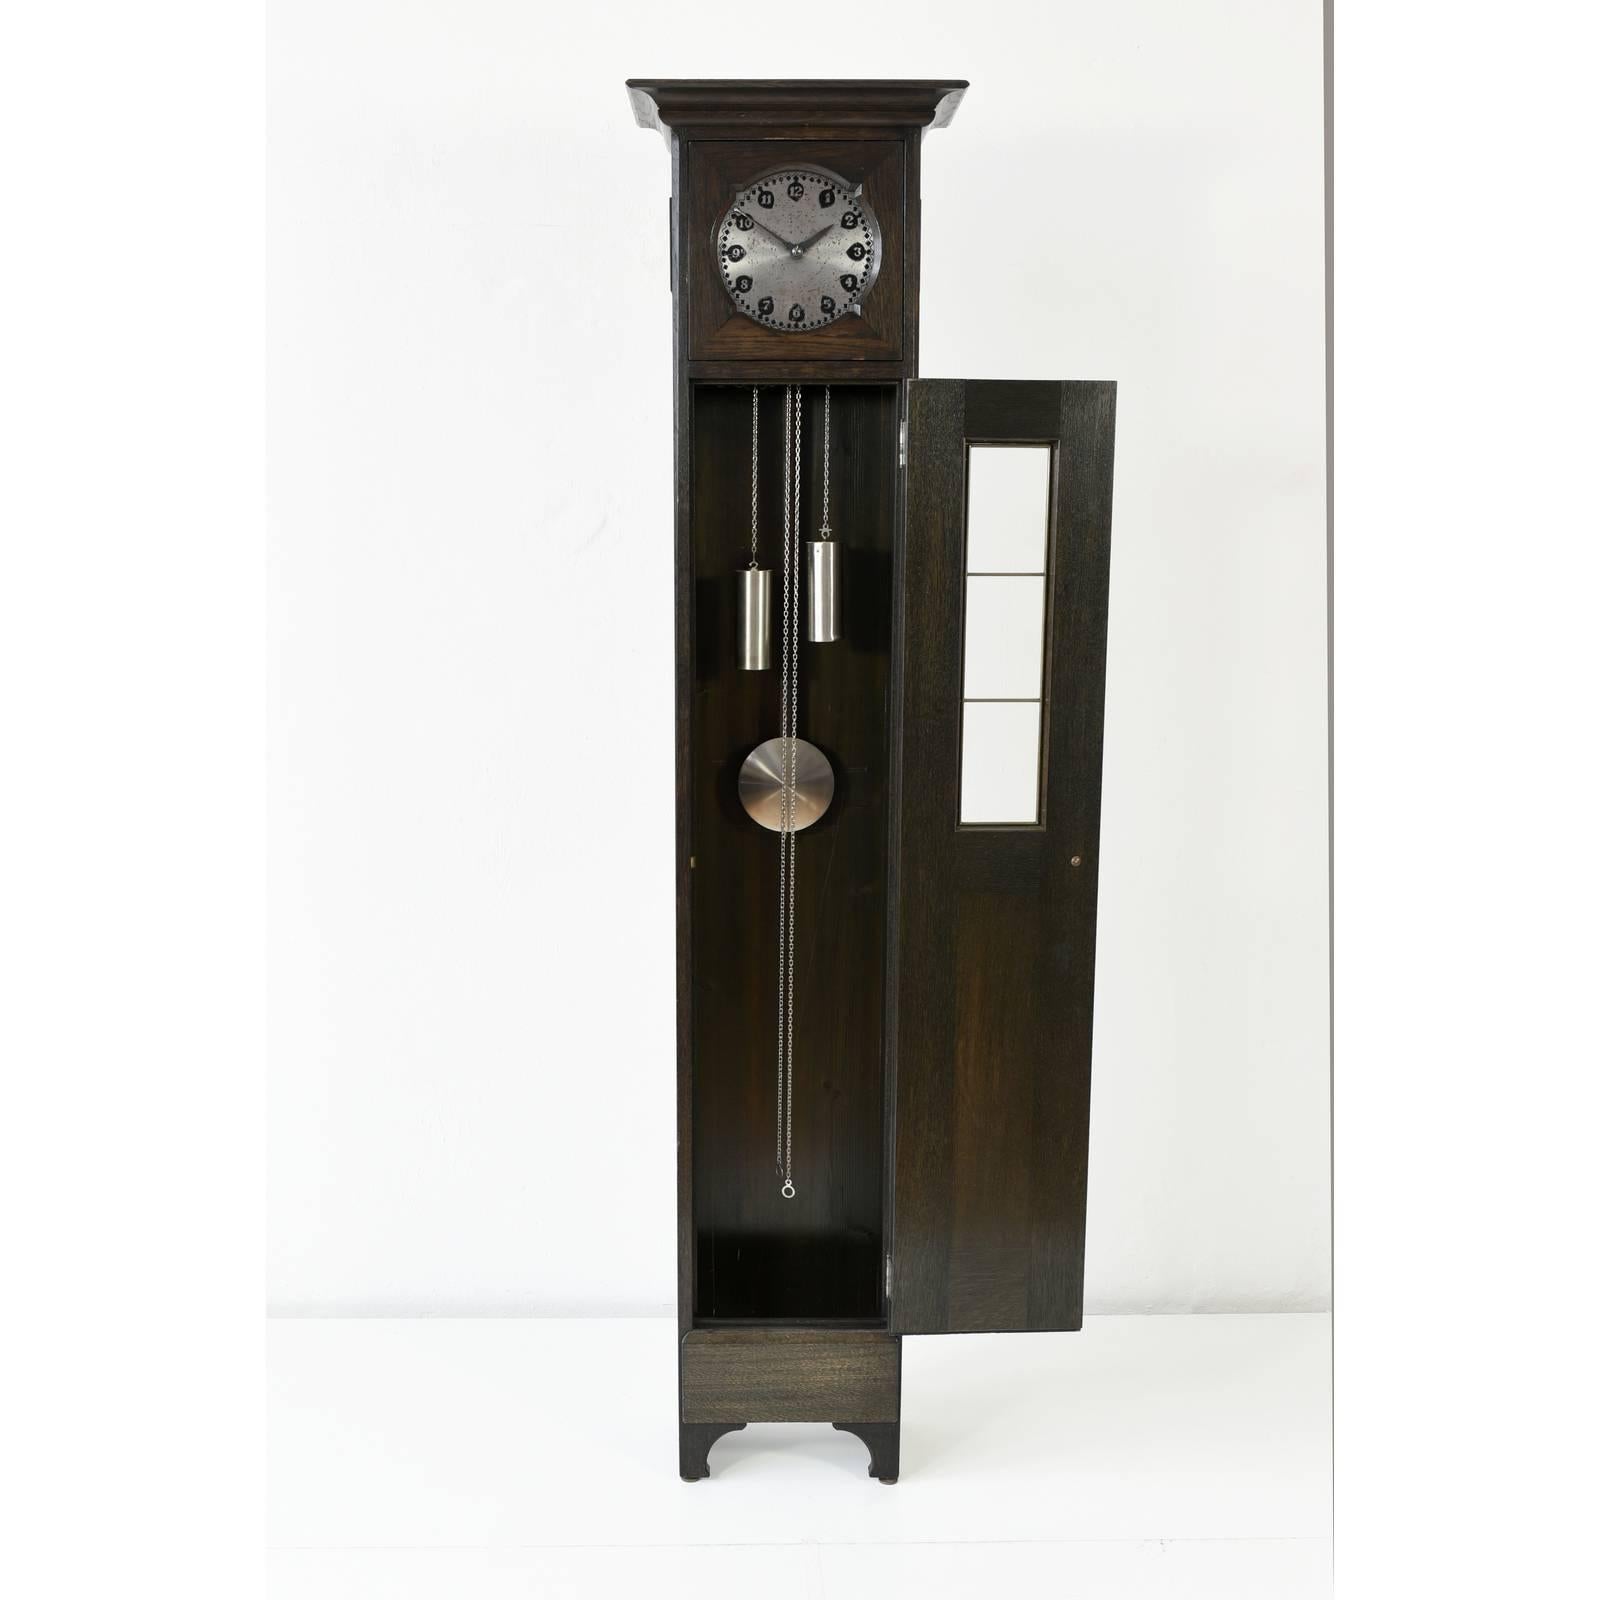 In the style of the late Art Nouveau Richard Riemerschmid designed the imposing case clock made in 1908. Only the best materials were used and equipped with a full plate movement by Gustav Becker, this clock still measures time exactly. Solid oak